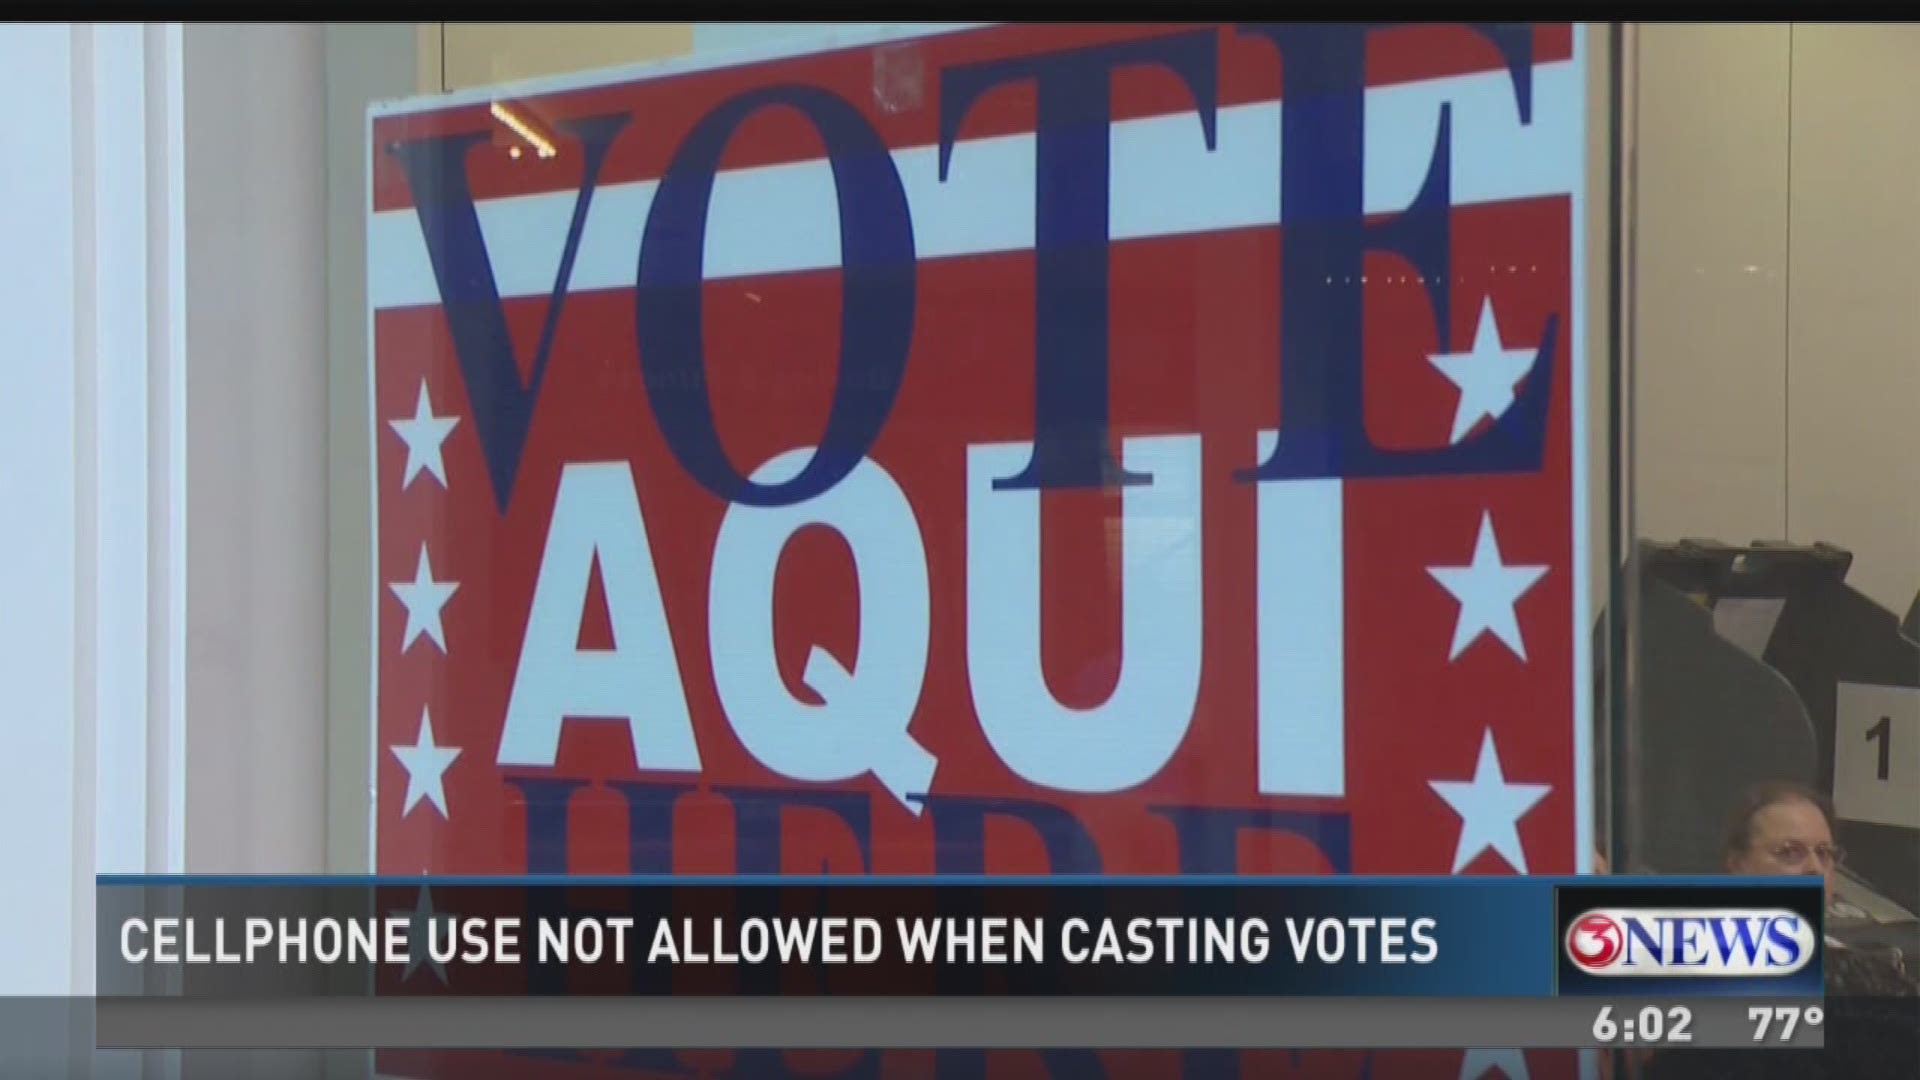 On Monday, thousands of people will be heading to the polls for the first day of early voting in San Antonio, and many are likely to have their phones in hand while casting their ballots.